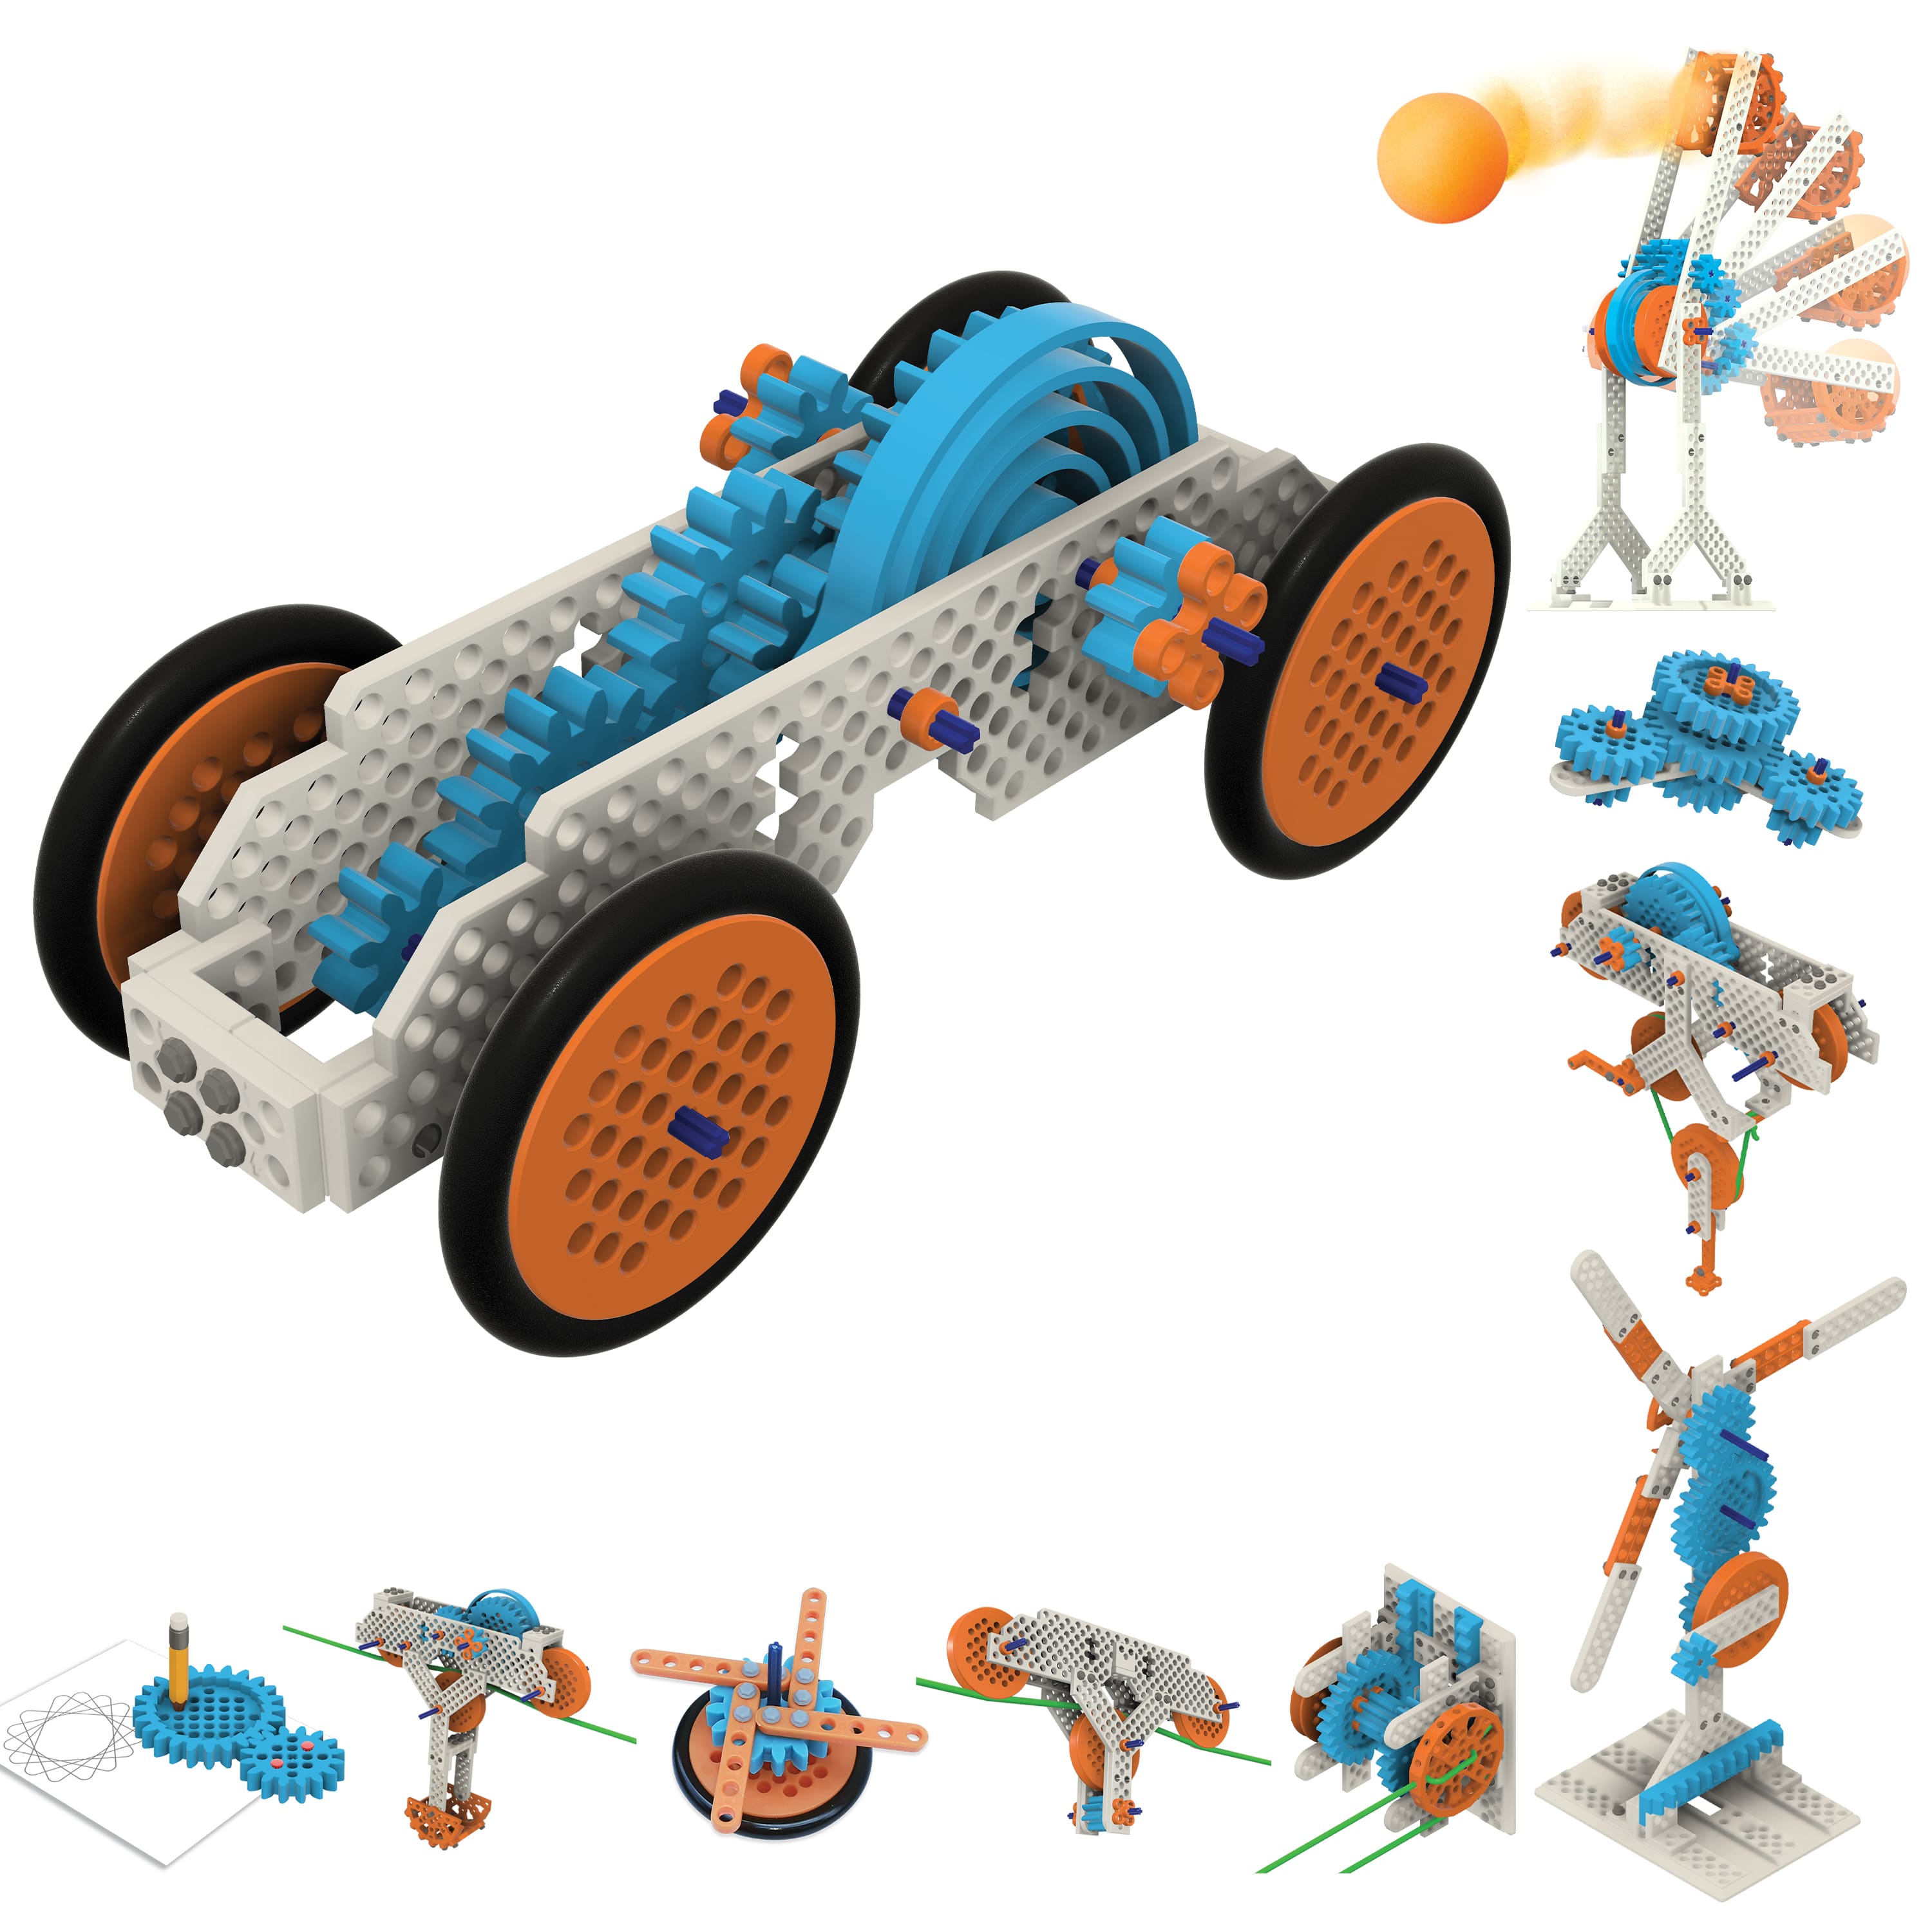 Be Amazing!&#x2122; Toys Gears &#x26; Gadgets Kit